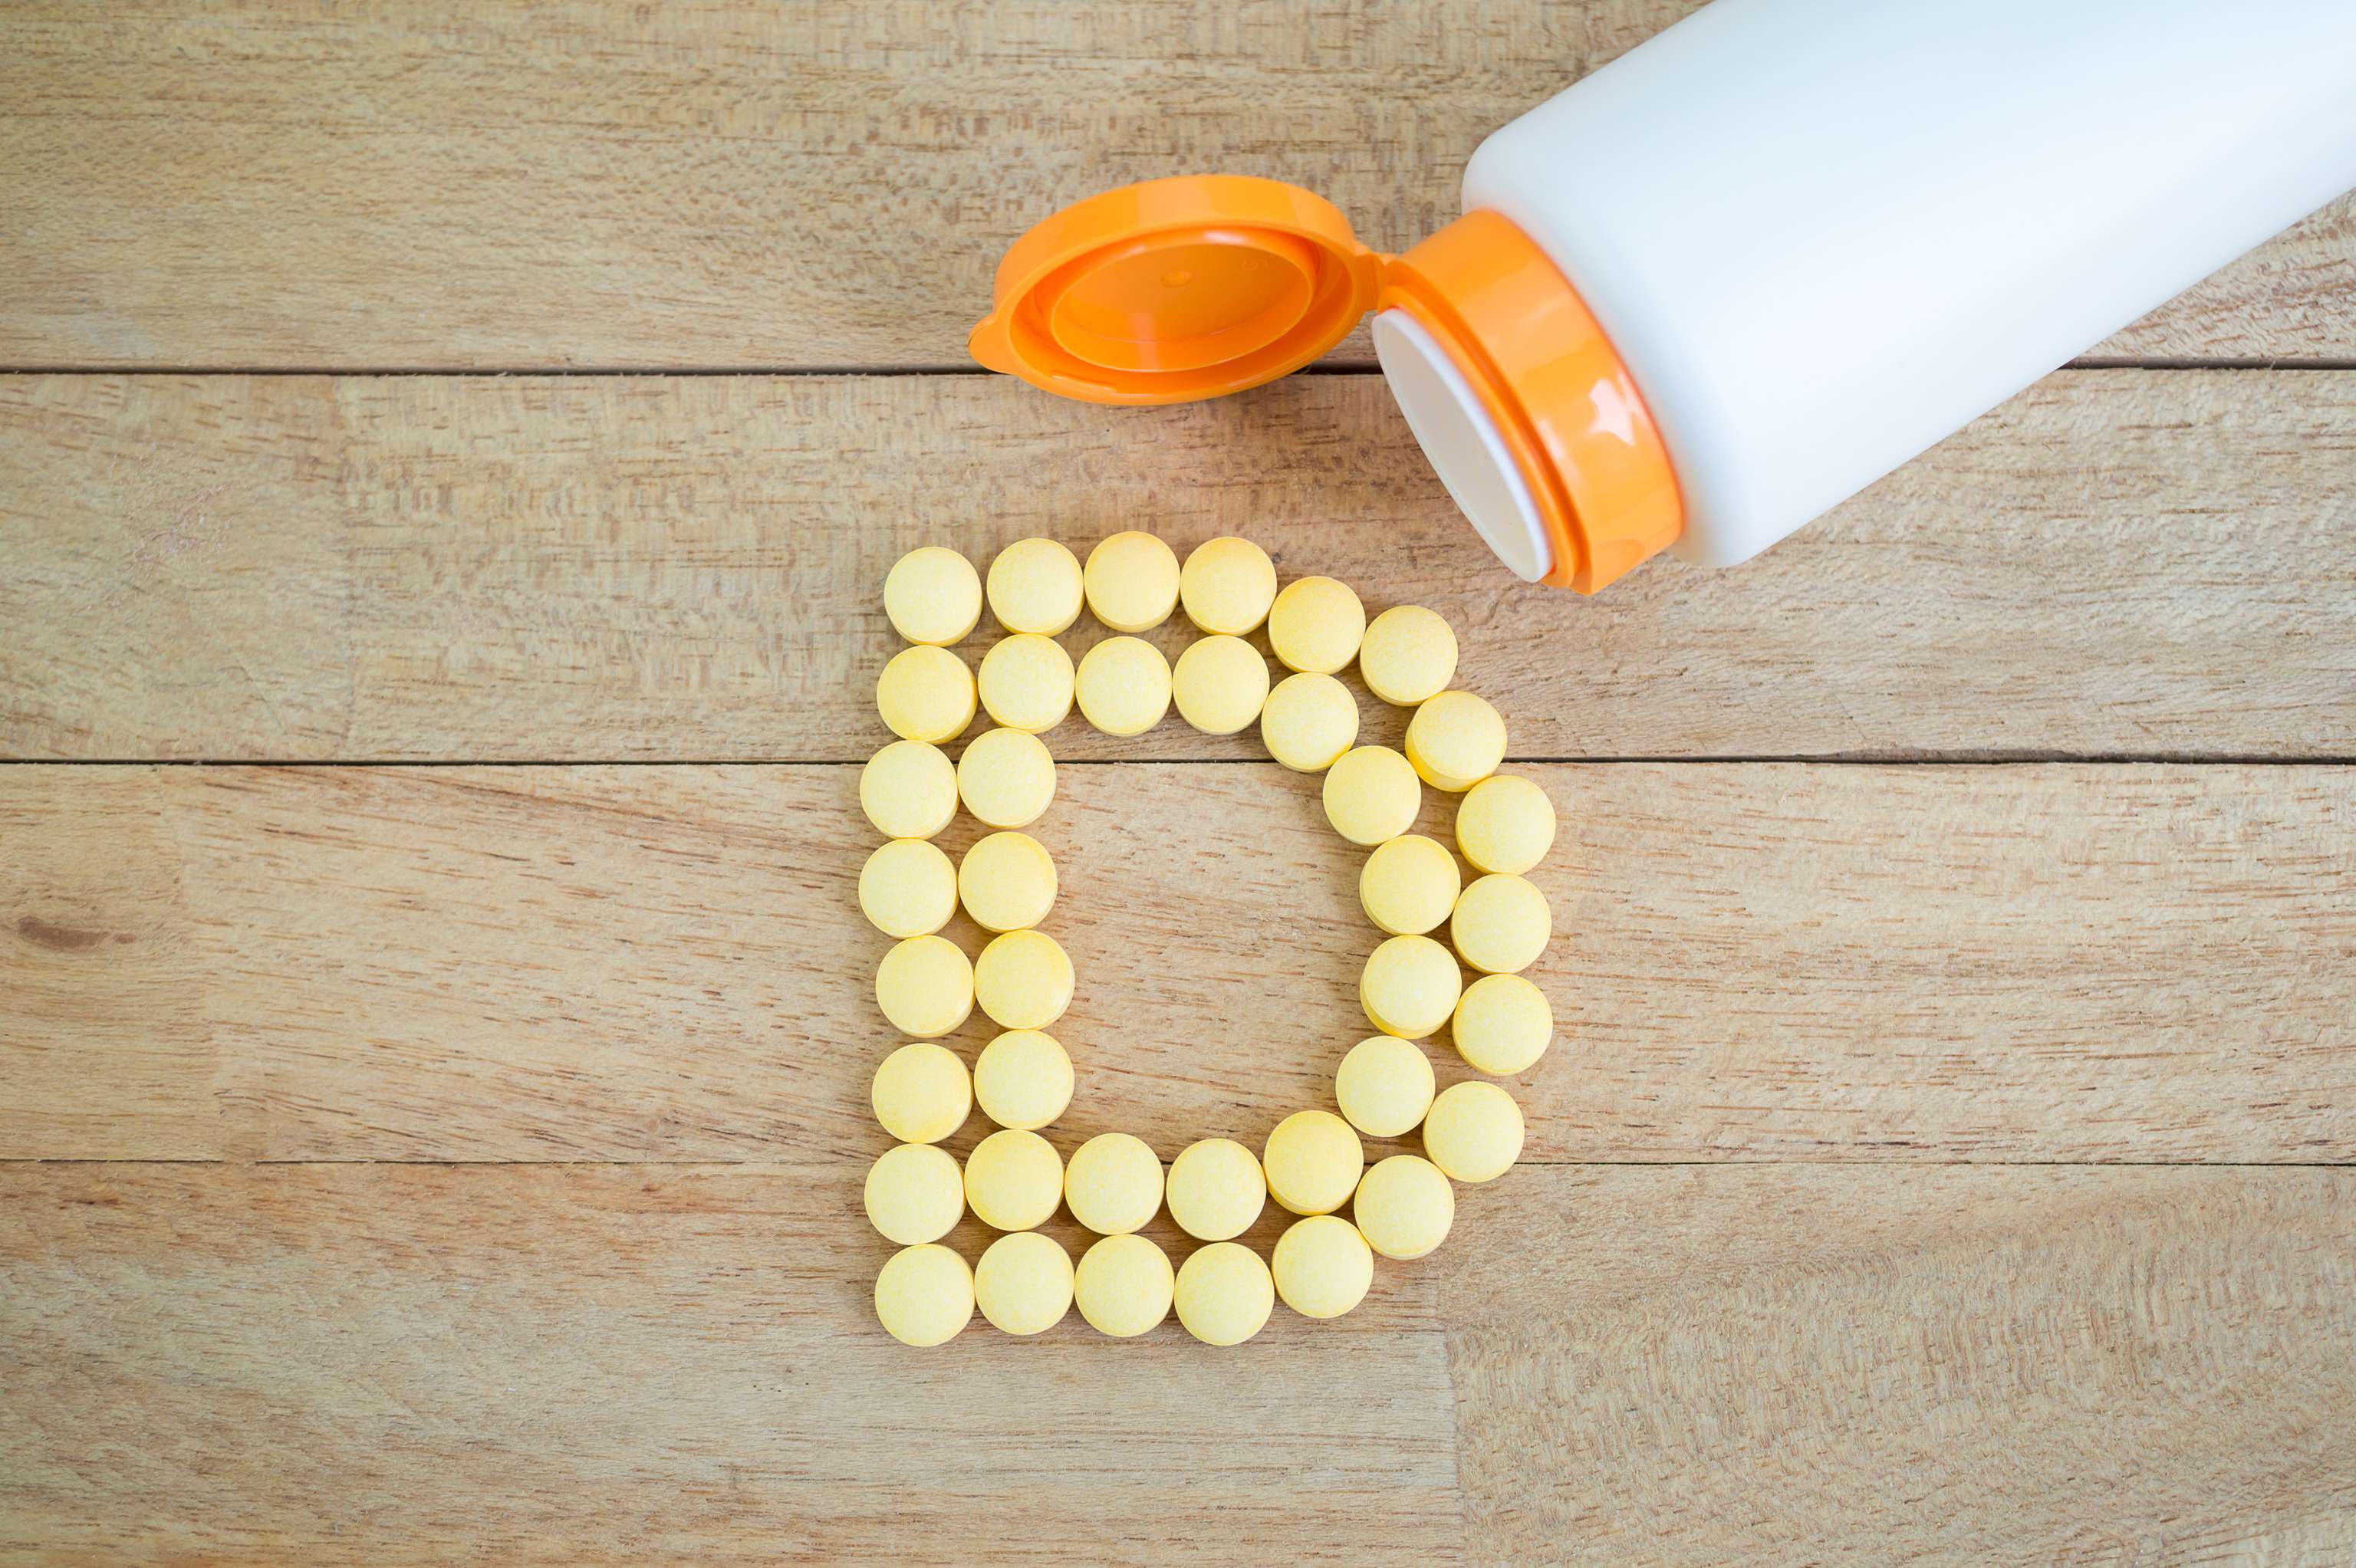 Gains in life years from vitamin D supplementation in cancer?